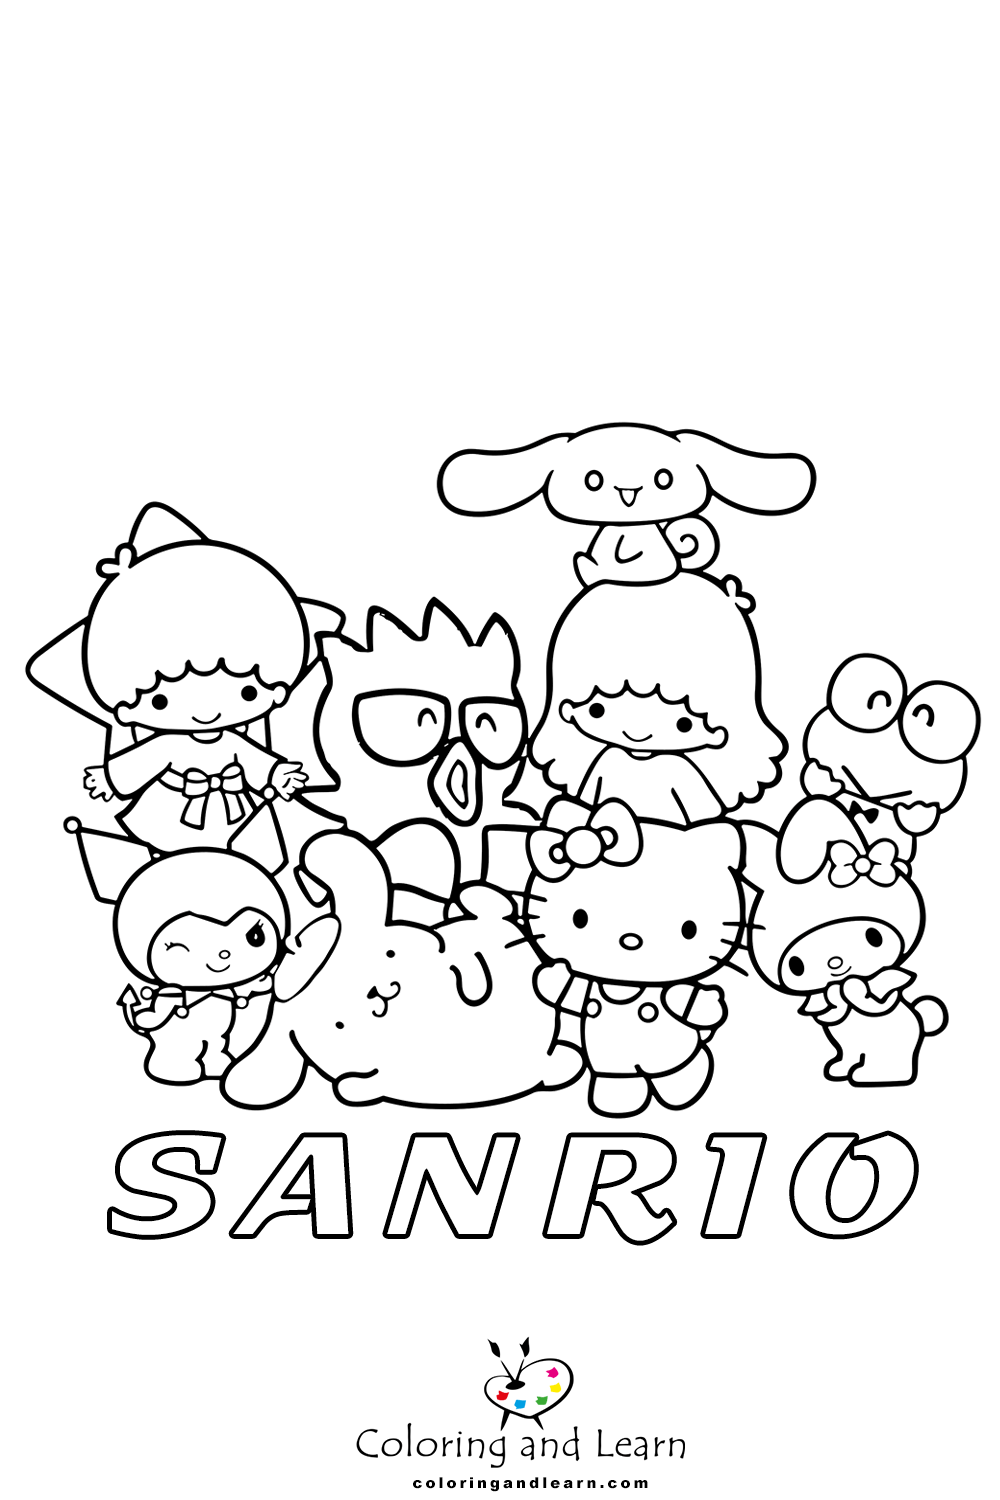 Sanrio coloring pages